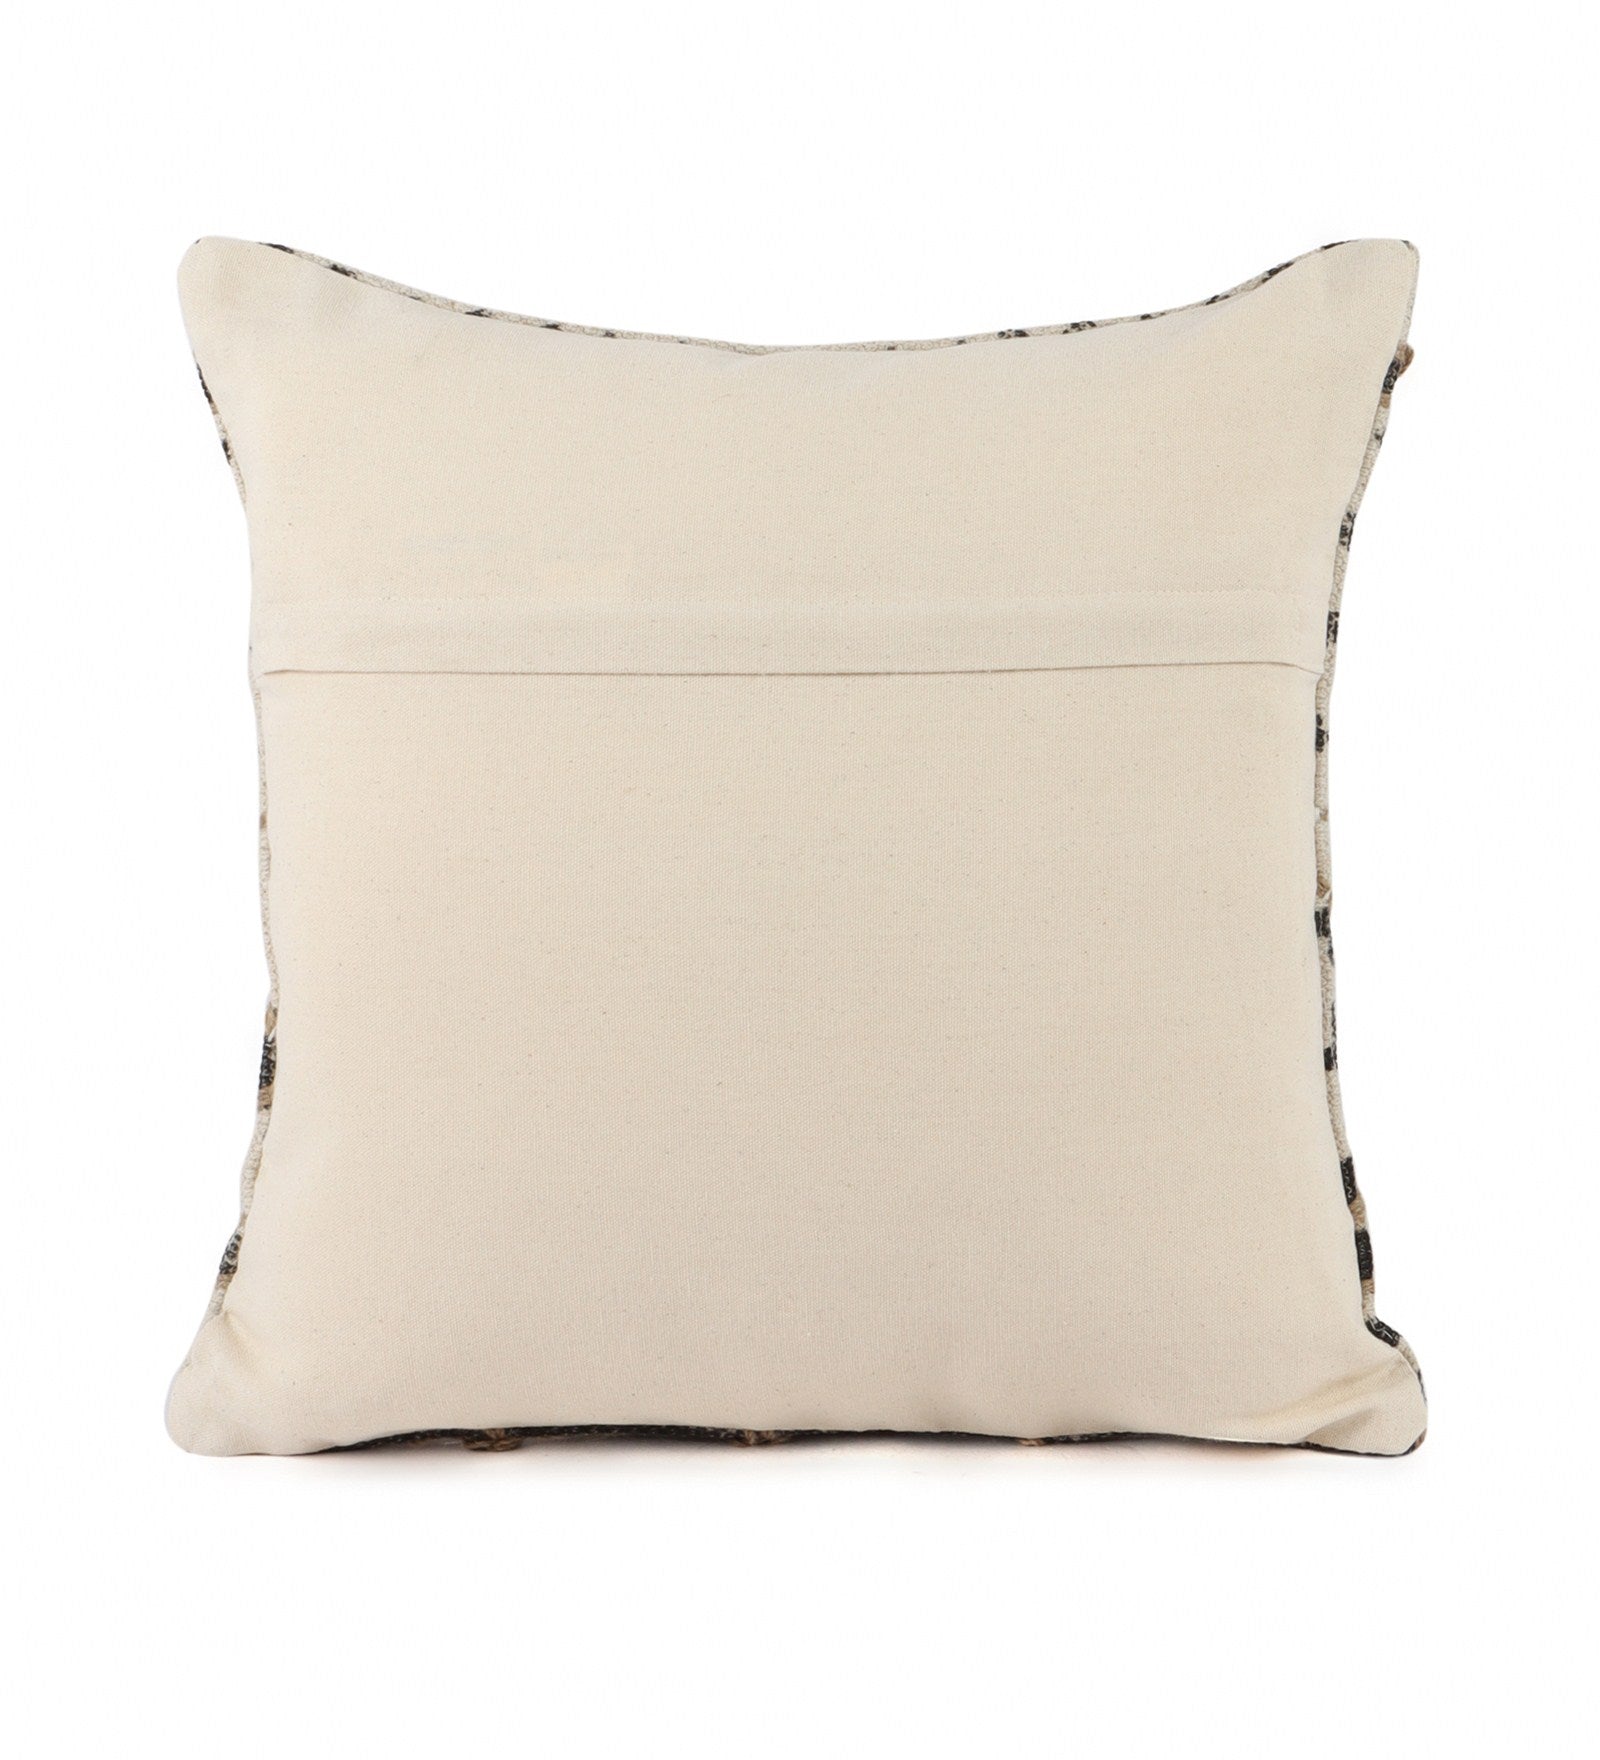 Embroidered Contemporary Cushion Cover (Black-Beige Geometric)